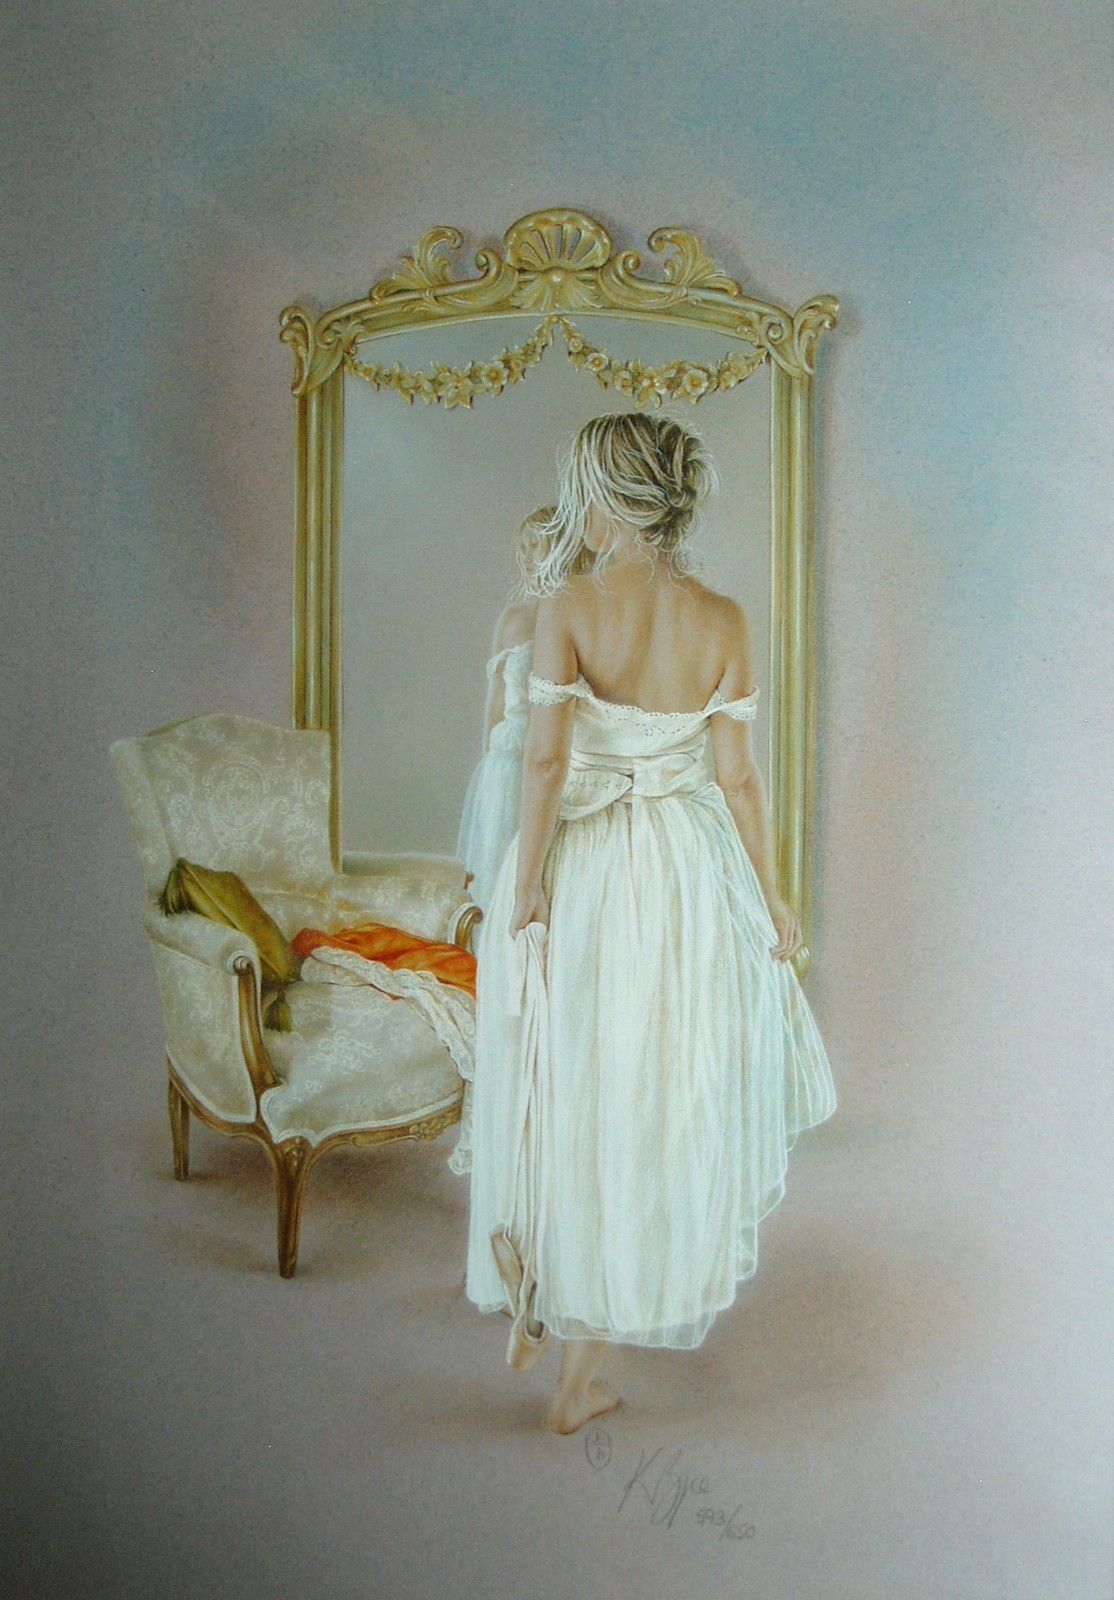 Kay Boyce - 'Through the Looking Glass' -  Limited Edition Art